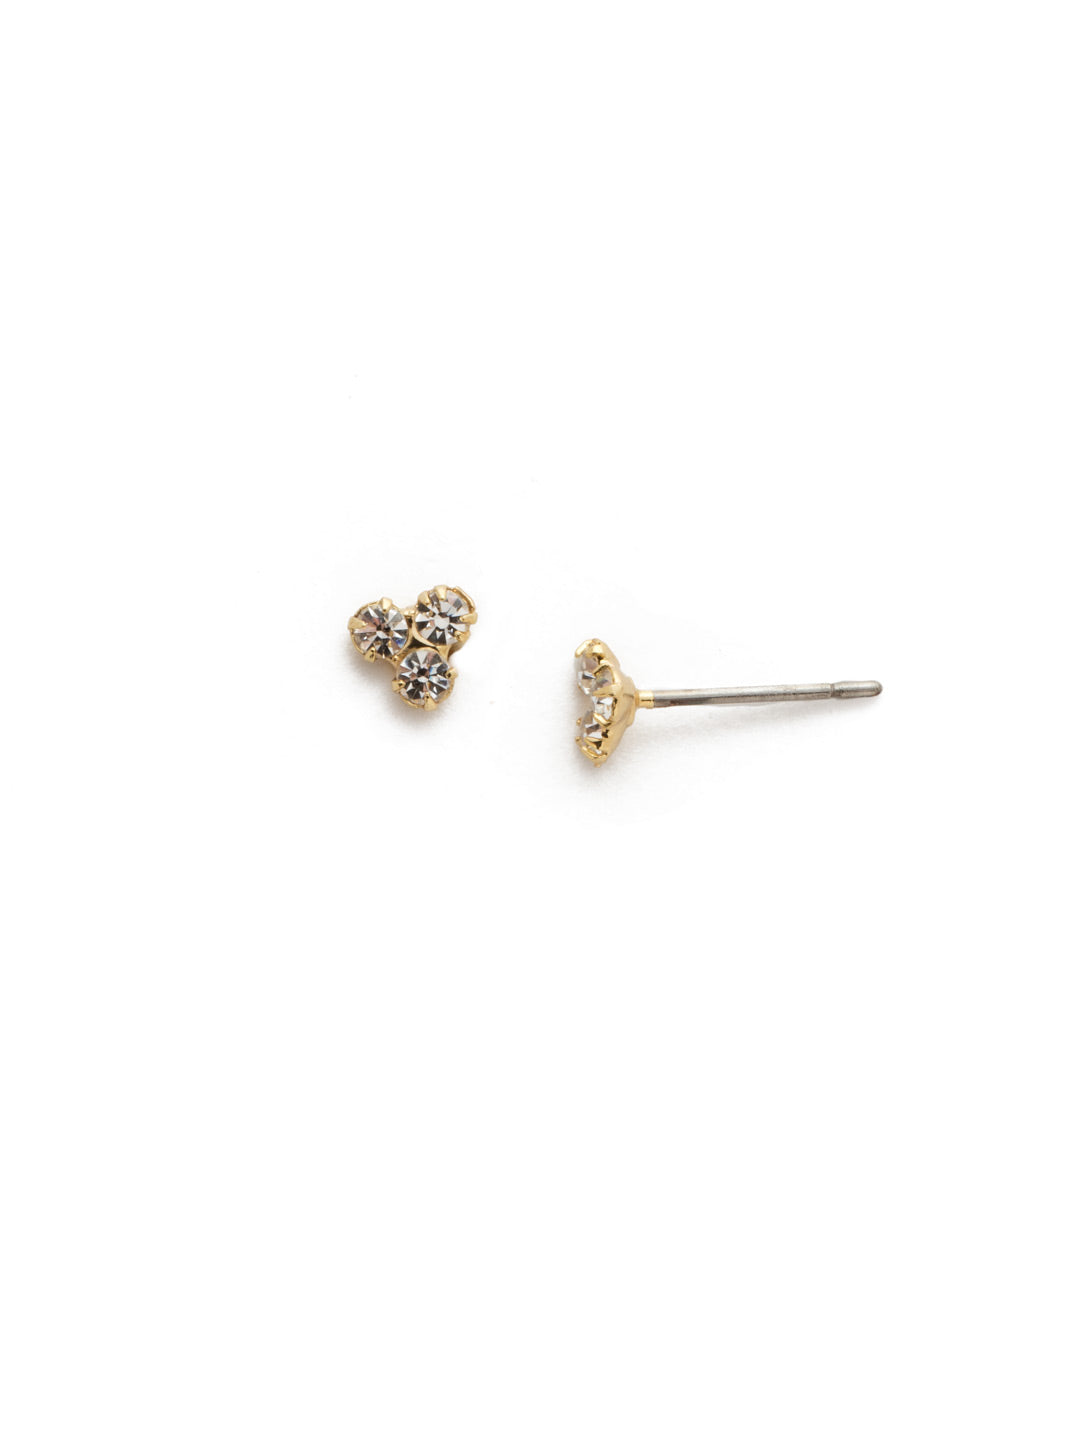 Halia Trinity Crystal Stud Earrings - 4EEK27BGCRY - <p>A terrific trio of sparkling crystals is easy to fasten on to give any outfit the perfect amount of shine. From Sorrelli's Crystal collection in our Bright Gold-tone finish.</p>